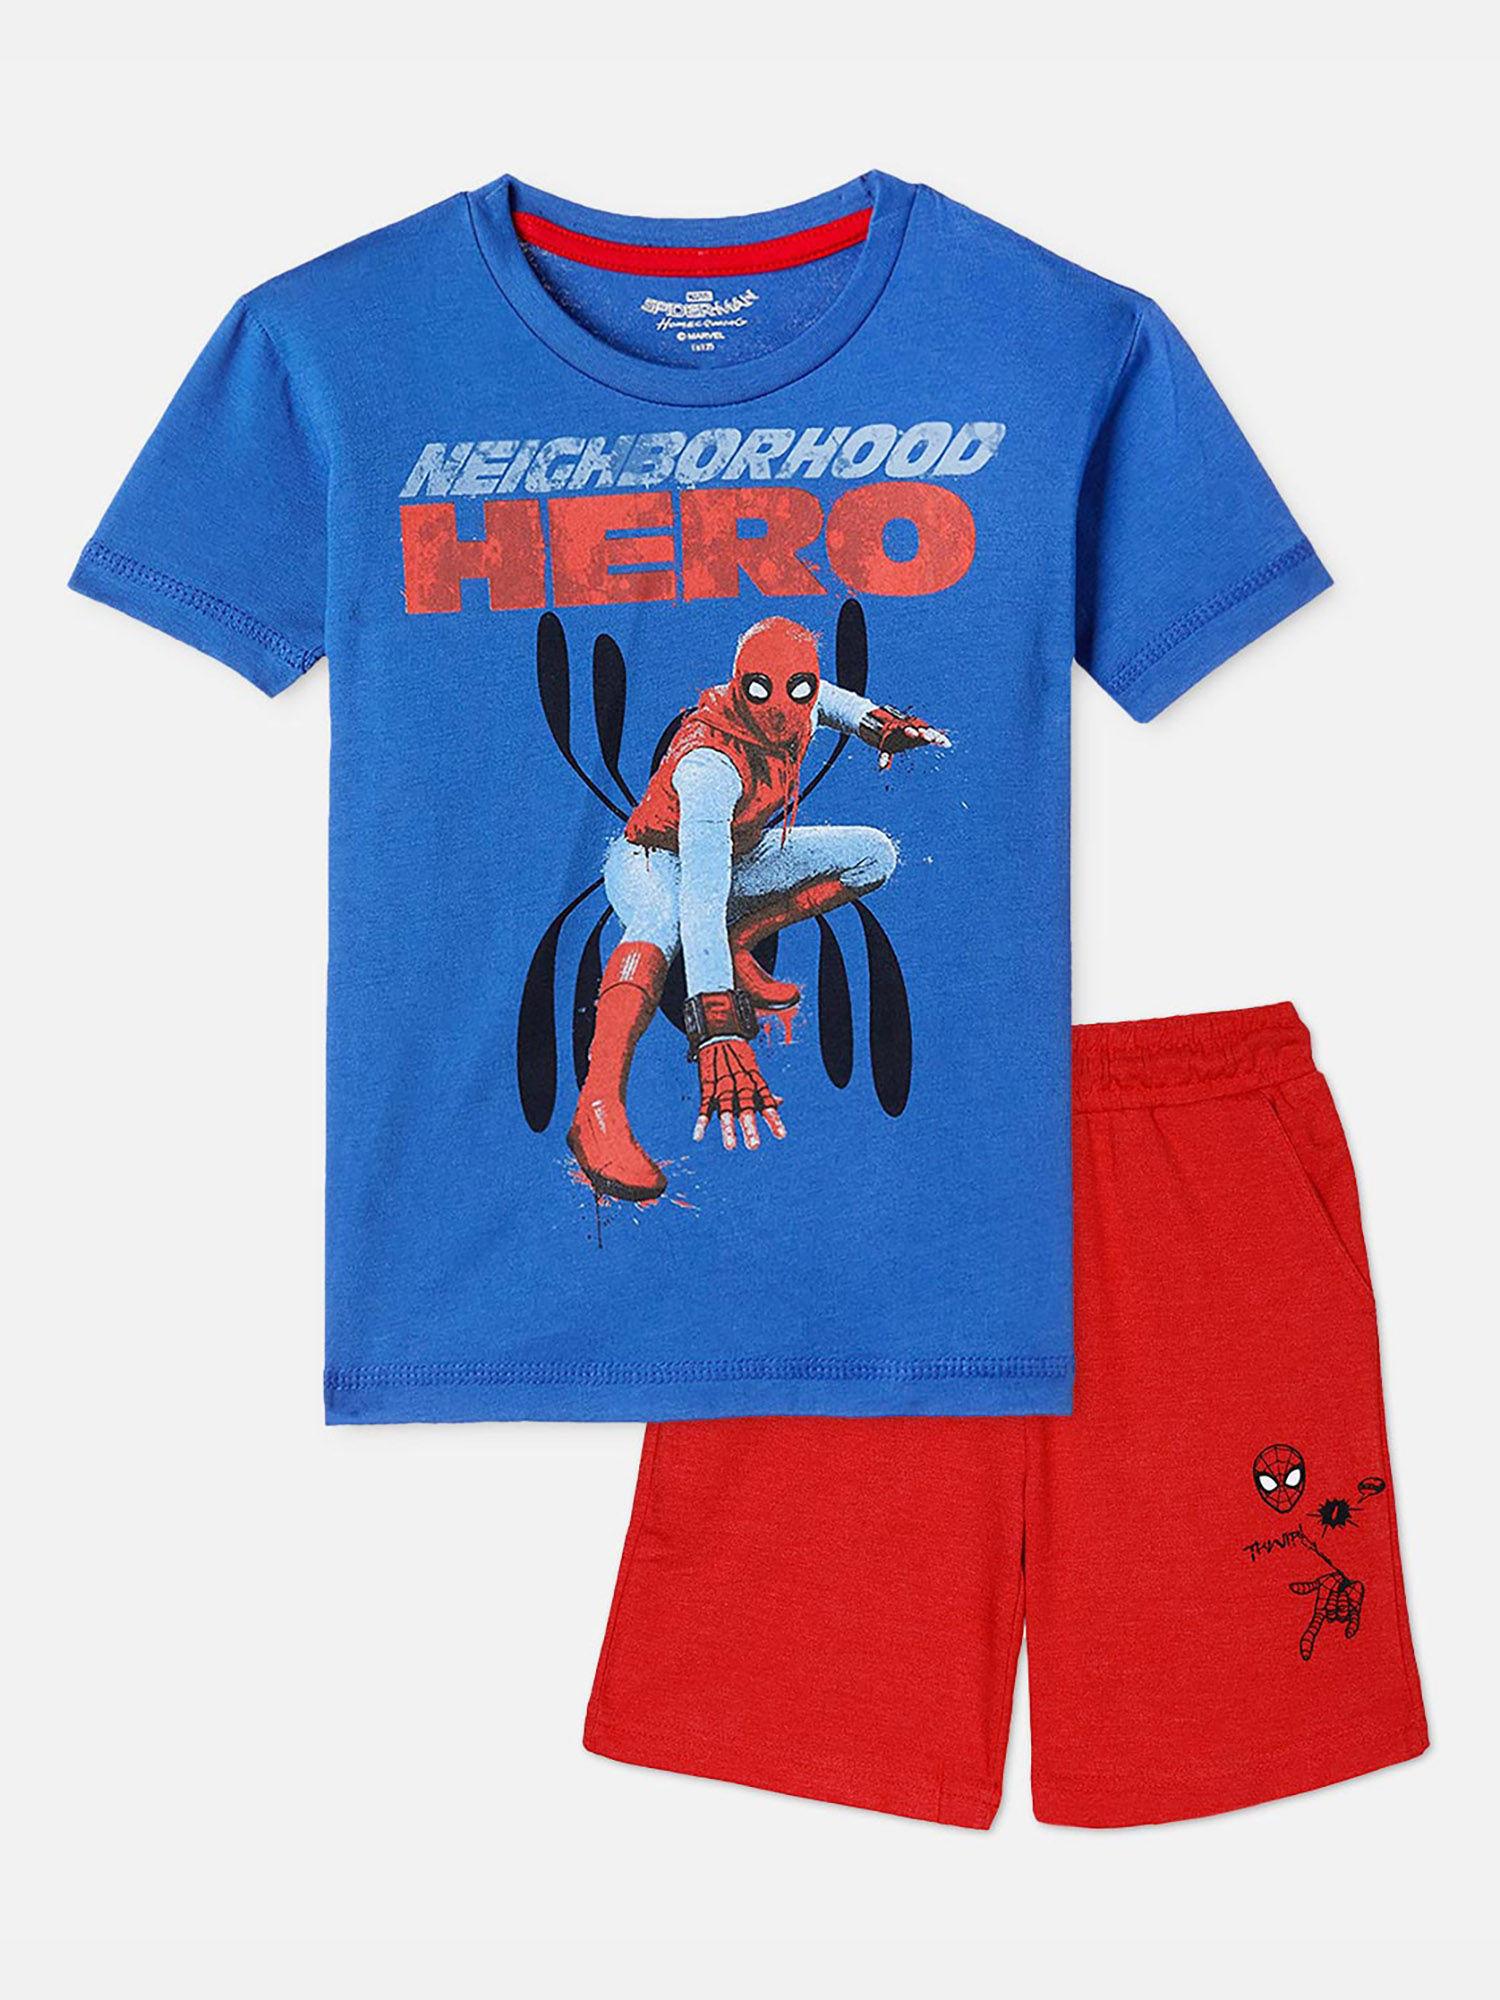 spiderman featured t-shirt & shorts (set of 2)